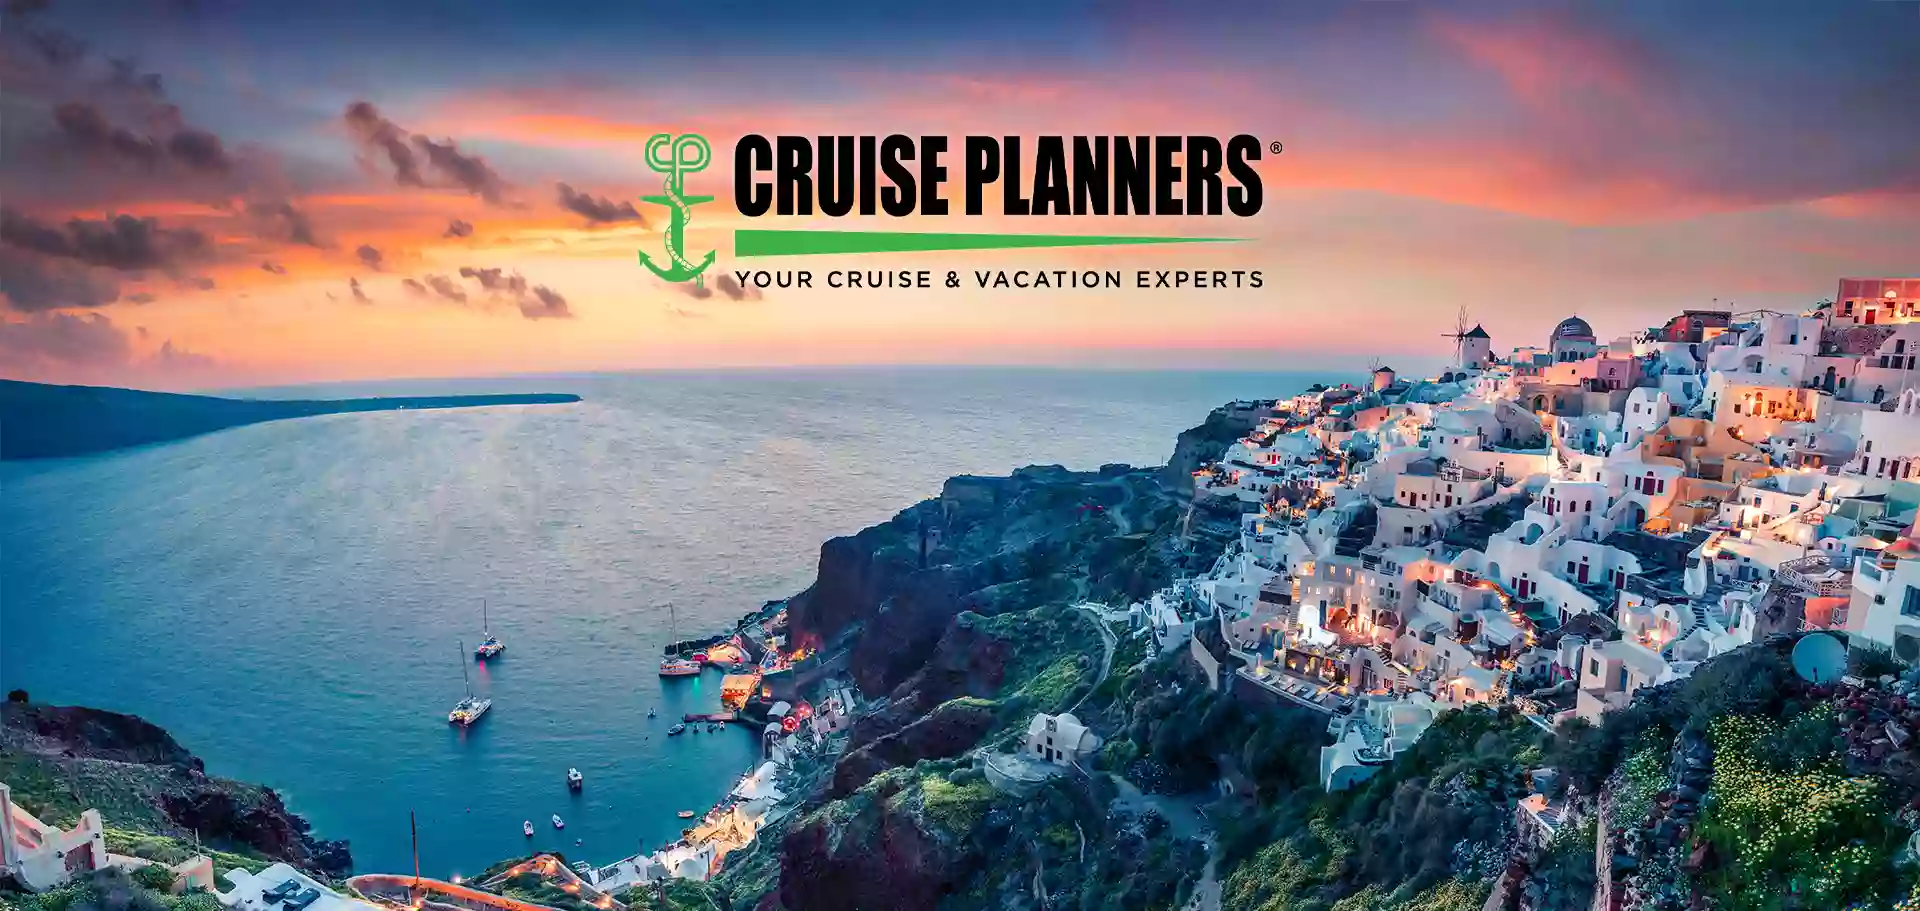 Danielle Peterson - Cruise Planners